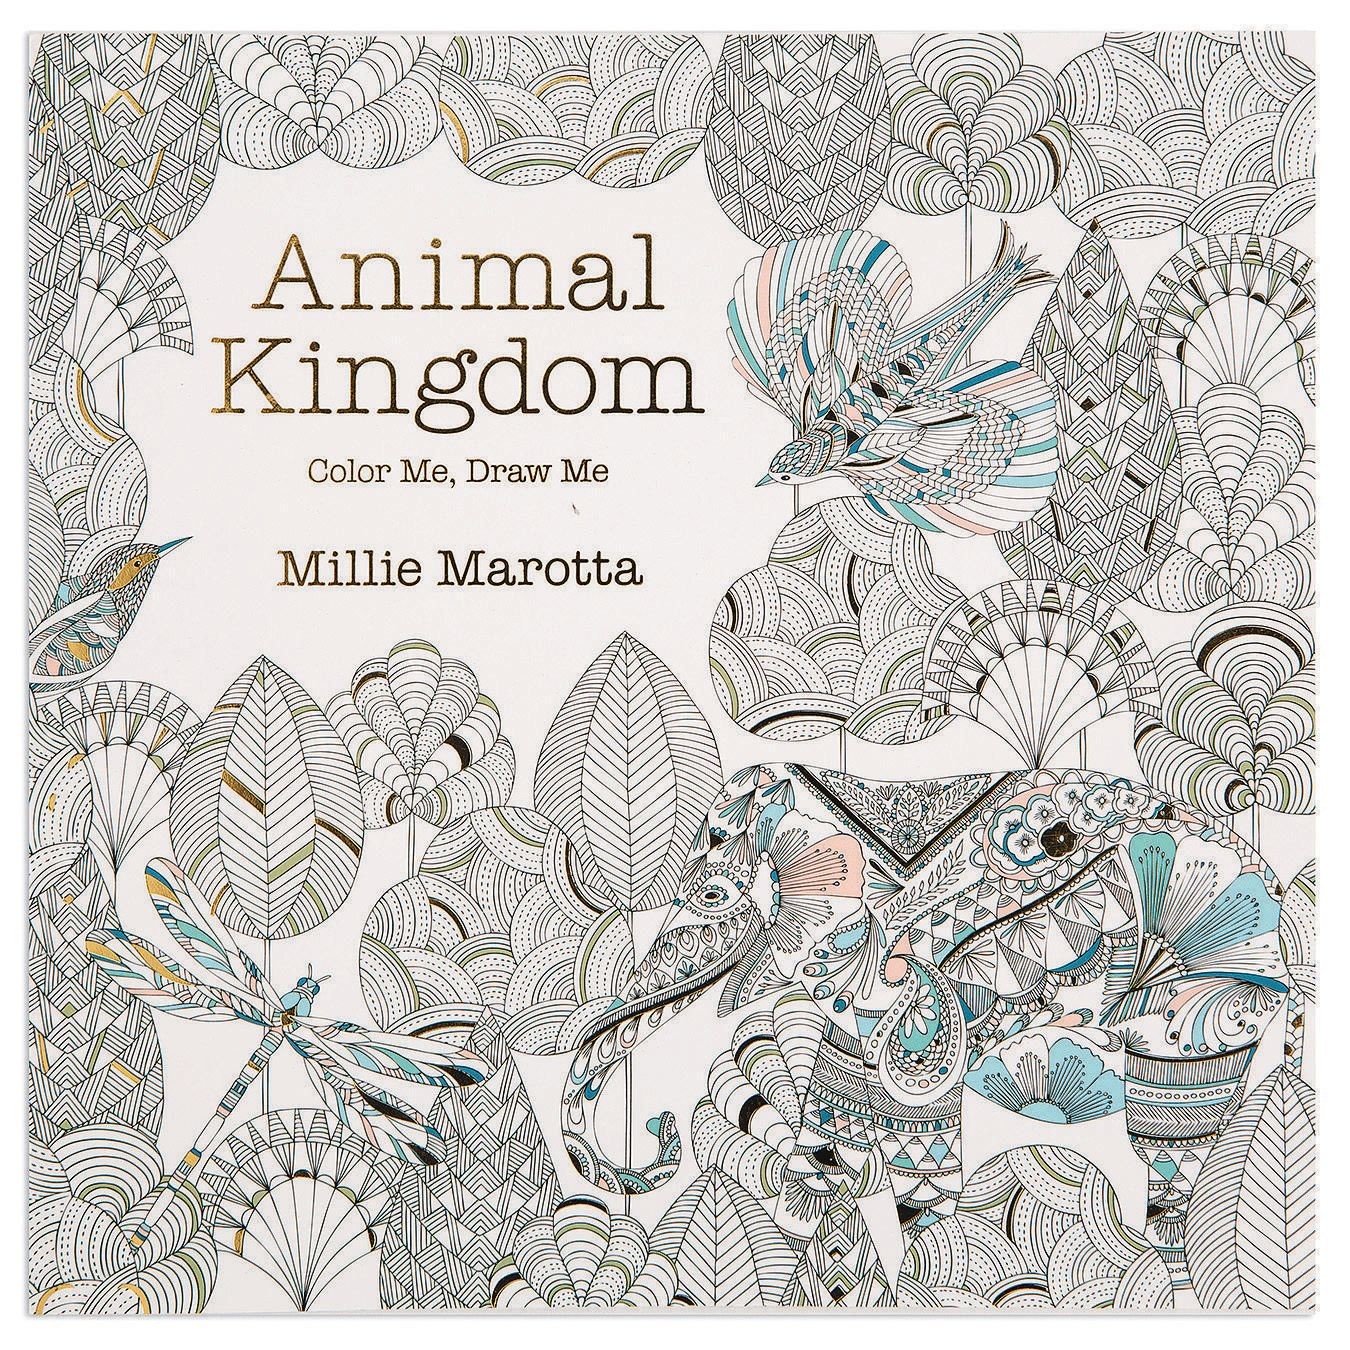 Animal Kingdom: Color Me, Draw Me (A Millie Marotta Adult Coloring Book)